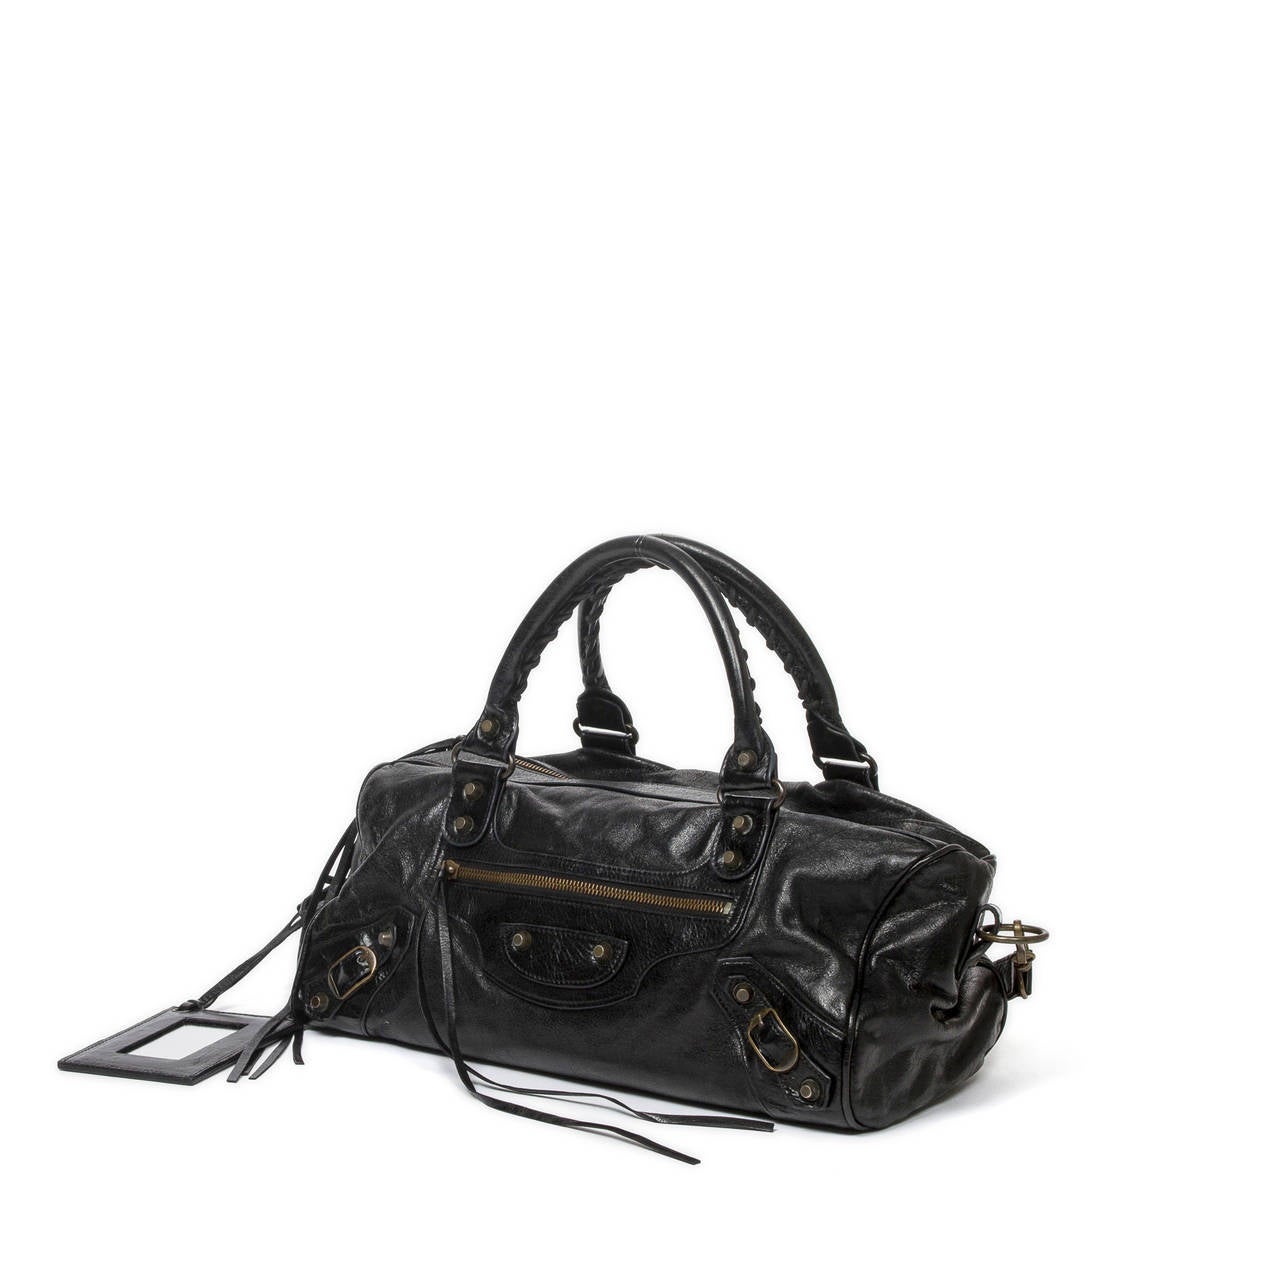 Balenciaga City Bag in black distressed leather with black leather handles (13cm) and strap (23cm) and brushed antique gold hardware. Mirror included.
Signs of wear on the leather, still in very good condition.